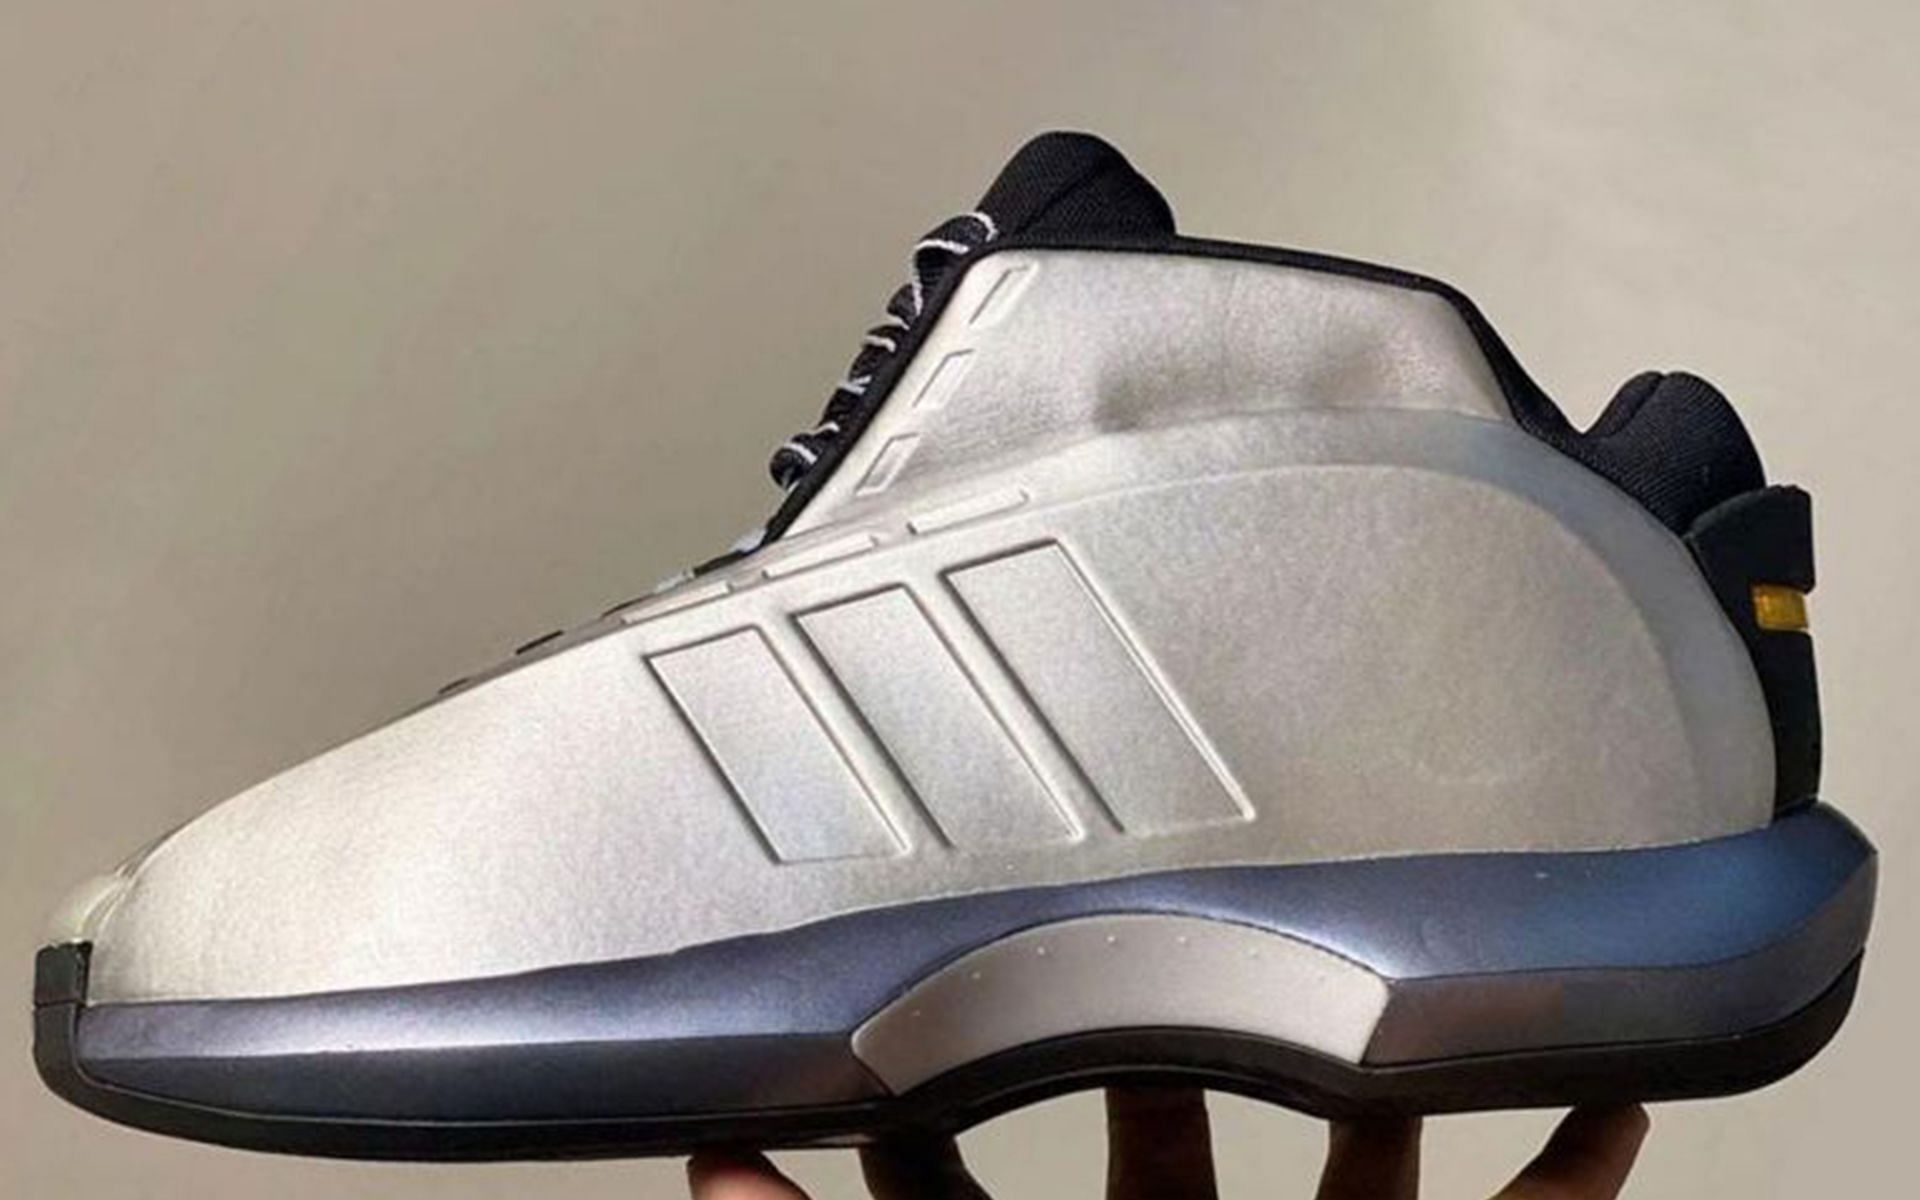 Where to Adidas Kobe Crazy 1 OG Metallic Silver shoes ? Release date, price and more explored